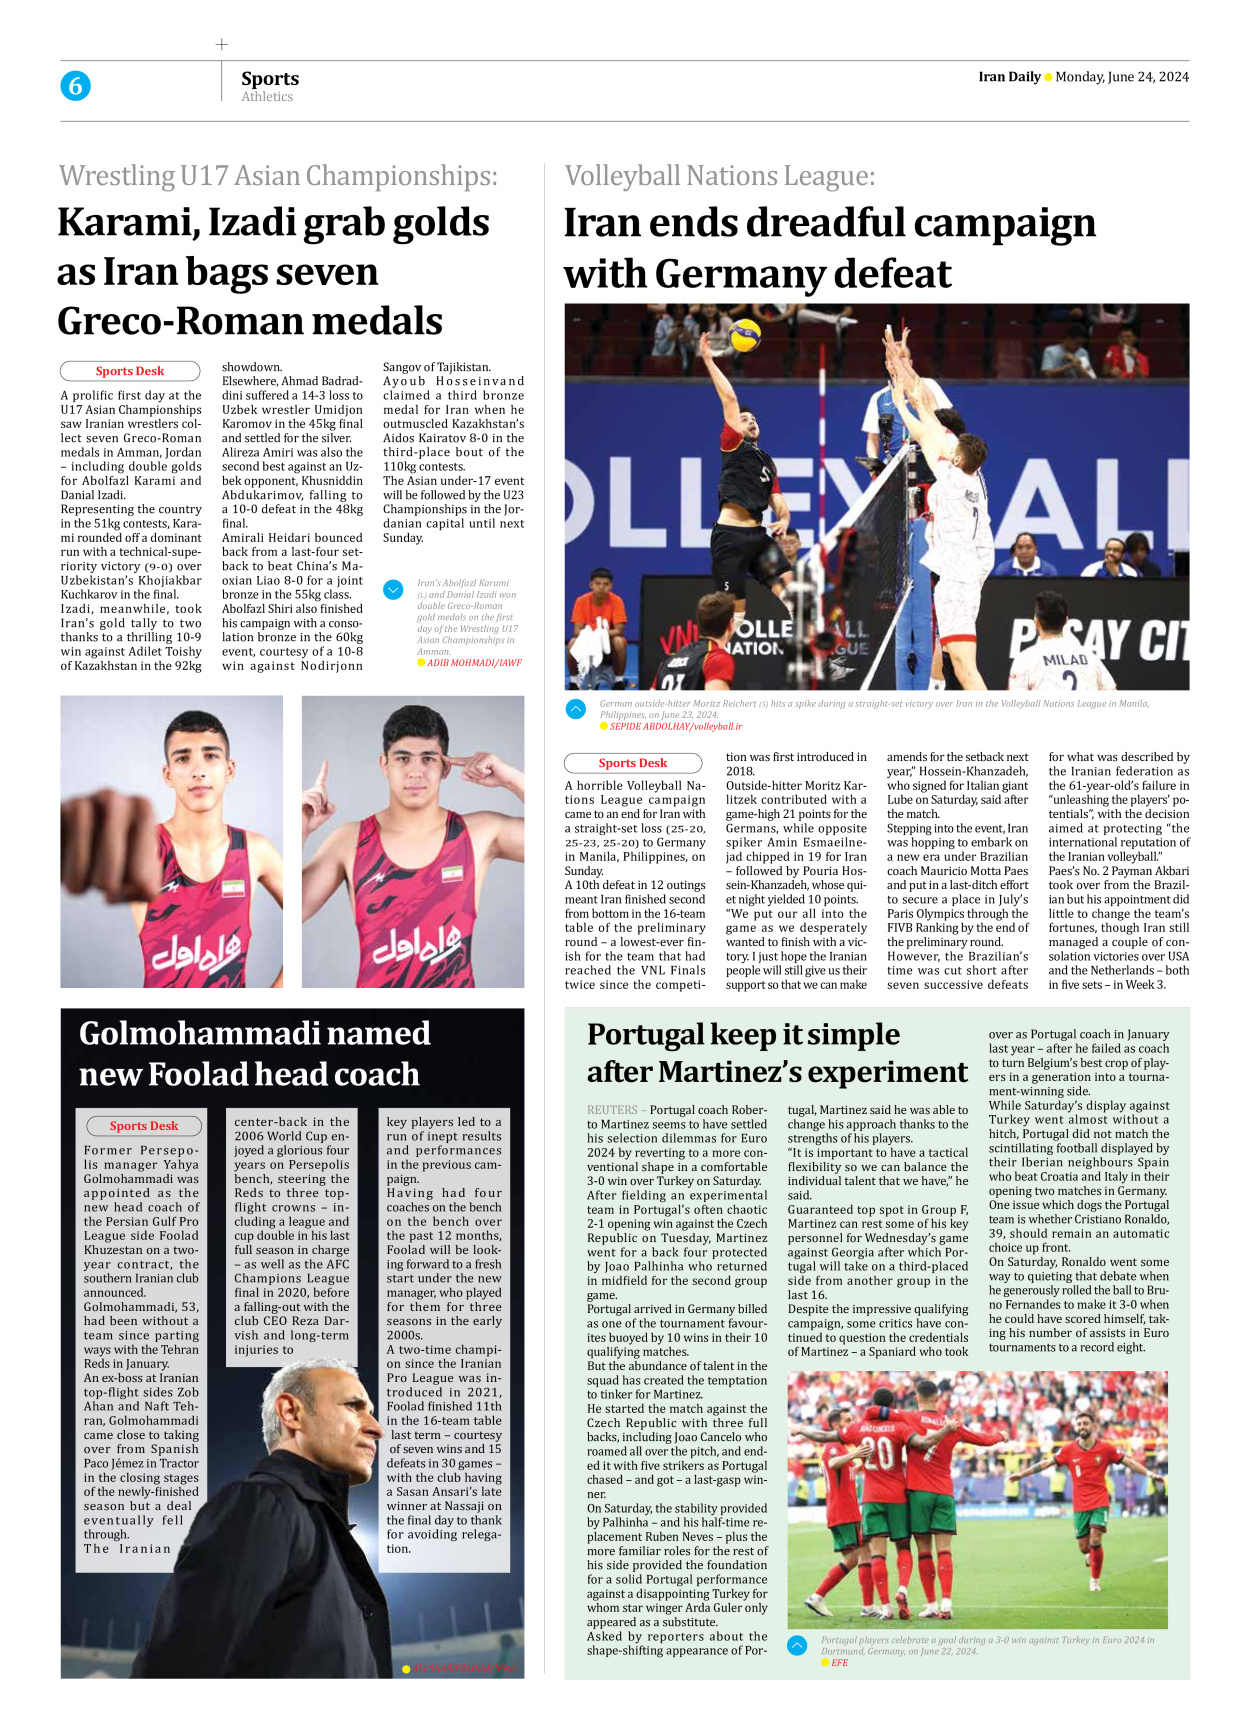 Iran Daily - Number Seven Thousand Five Hundred and Eighty Eight - 24 June 2024 - Page 6